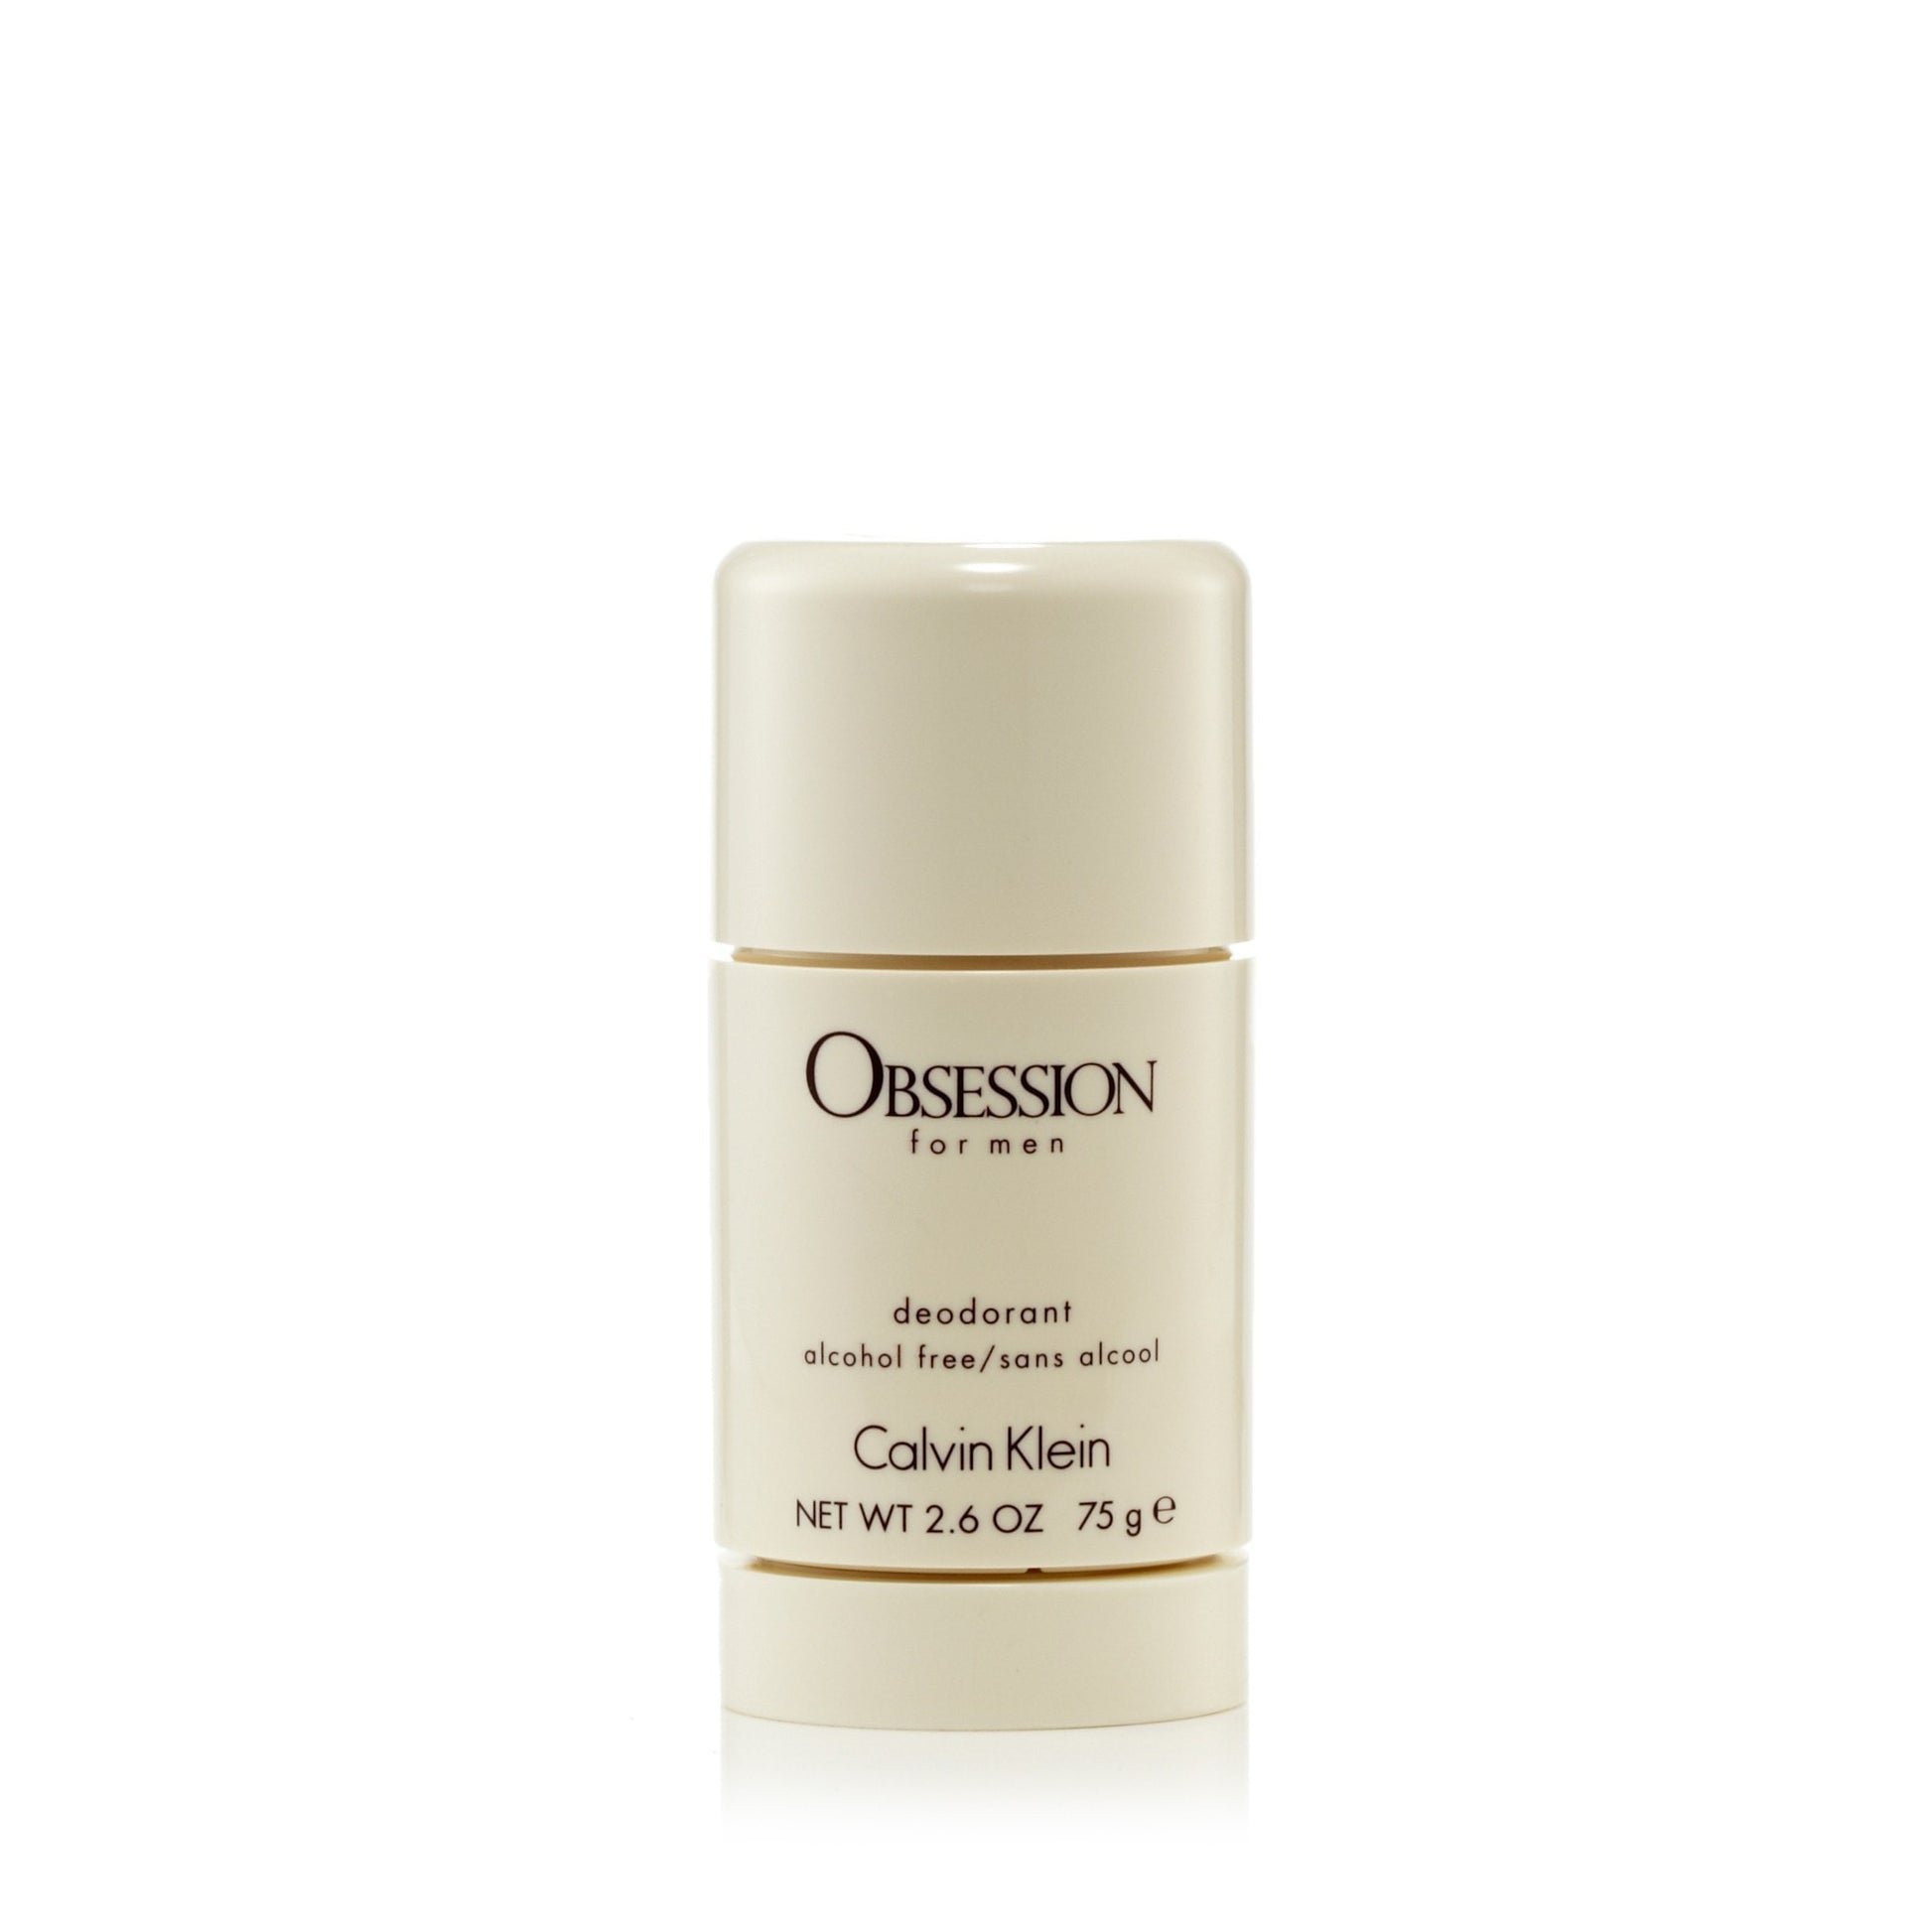 Obsession Deodorant for Men by Calvin Klein 2.6 oz. Click to open in modal